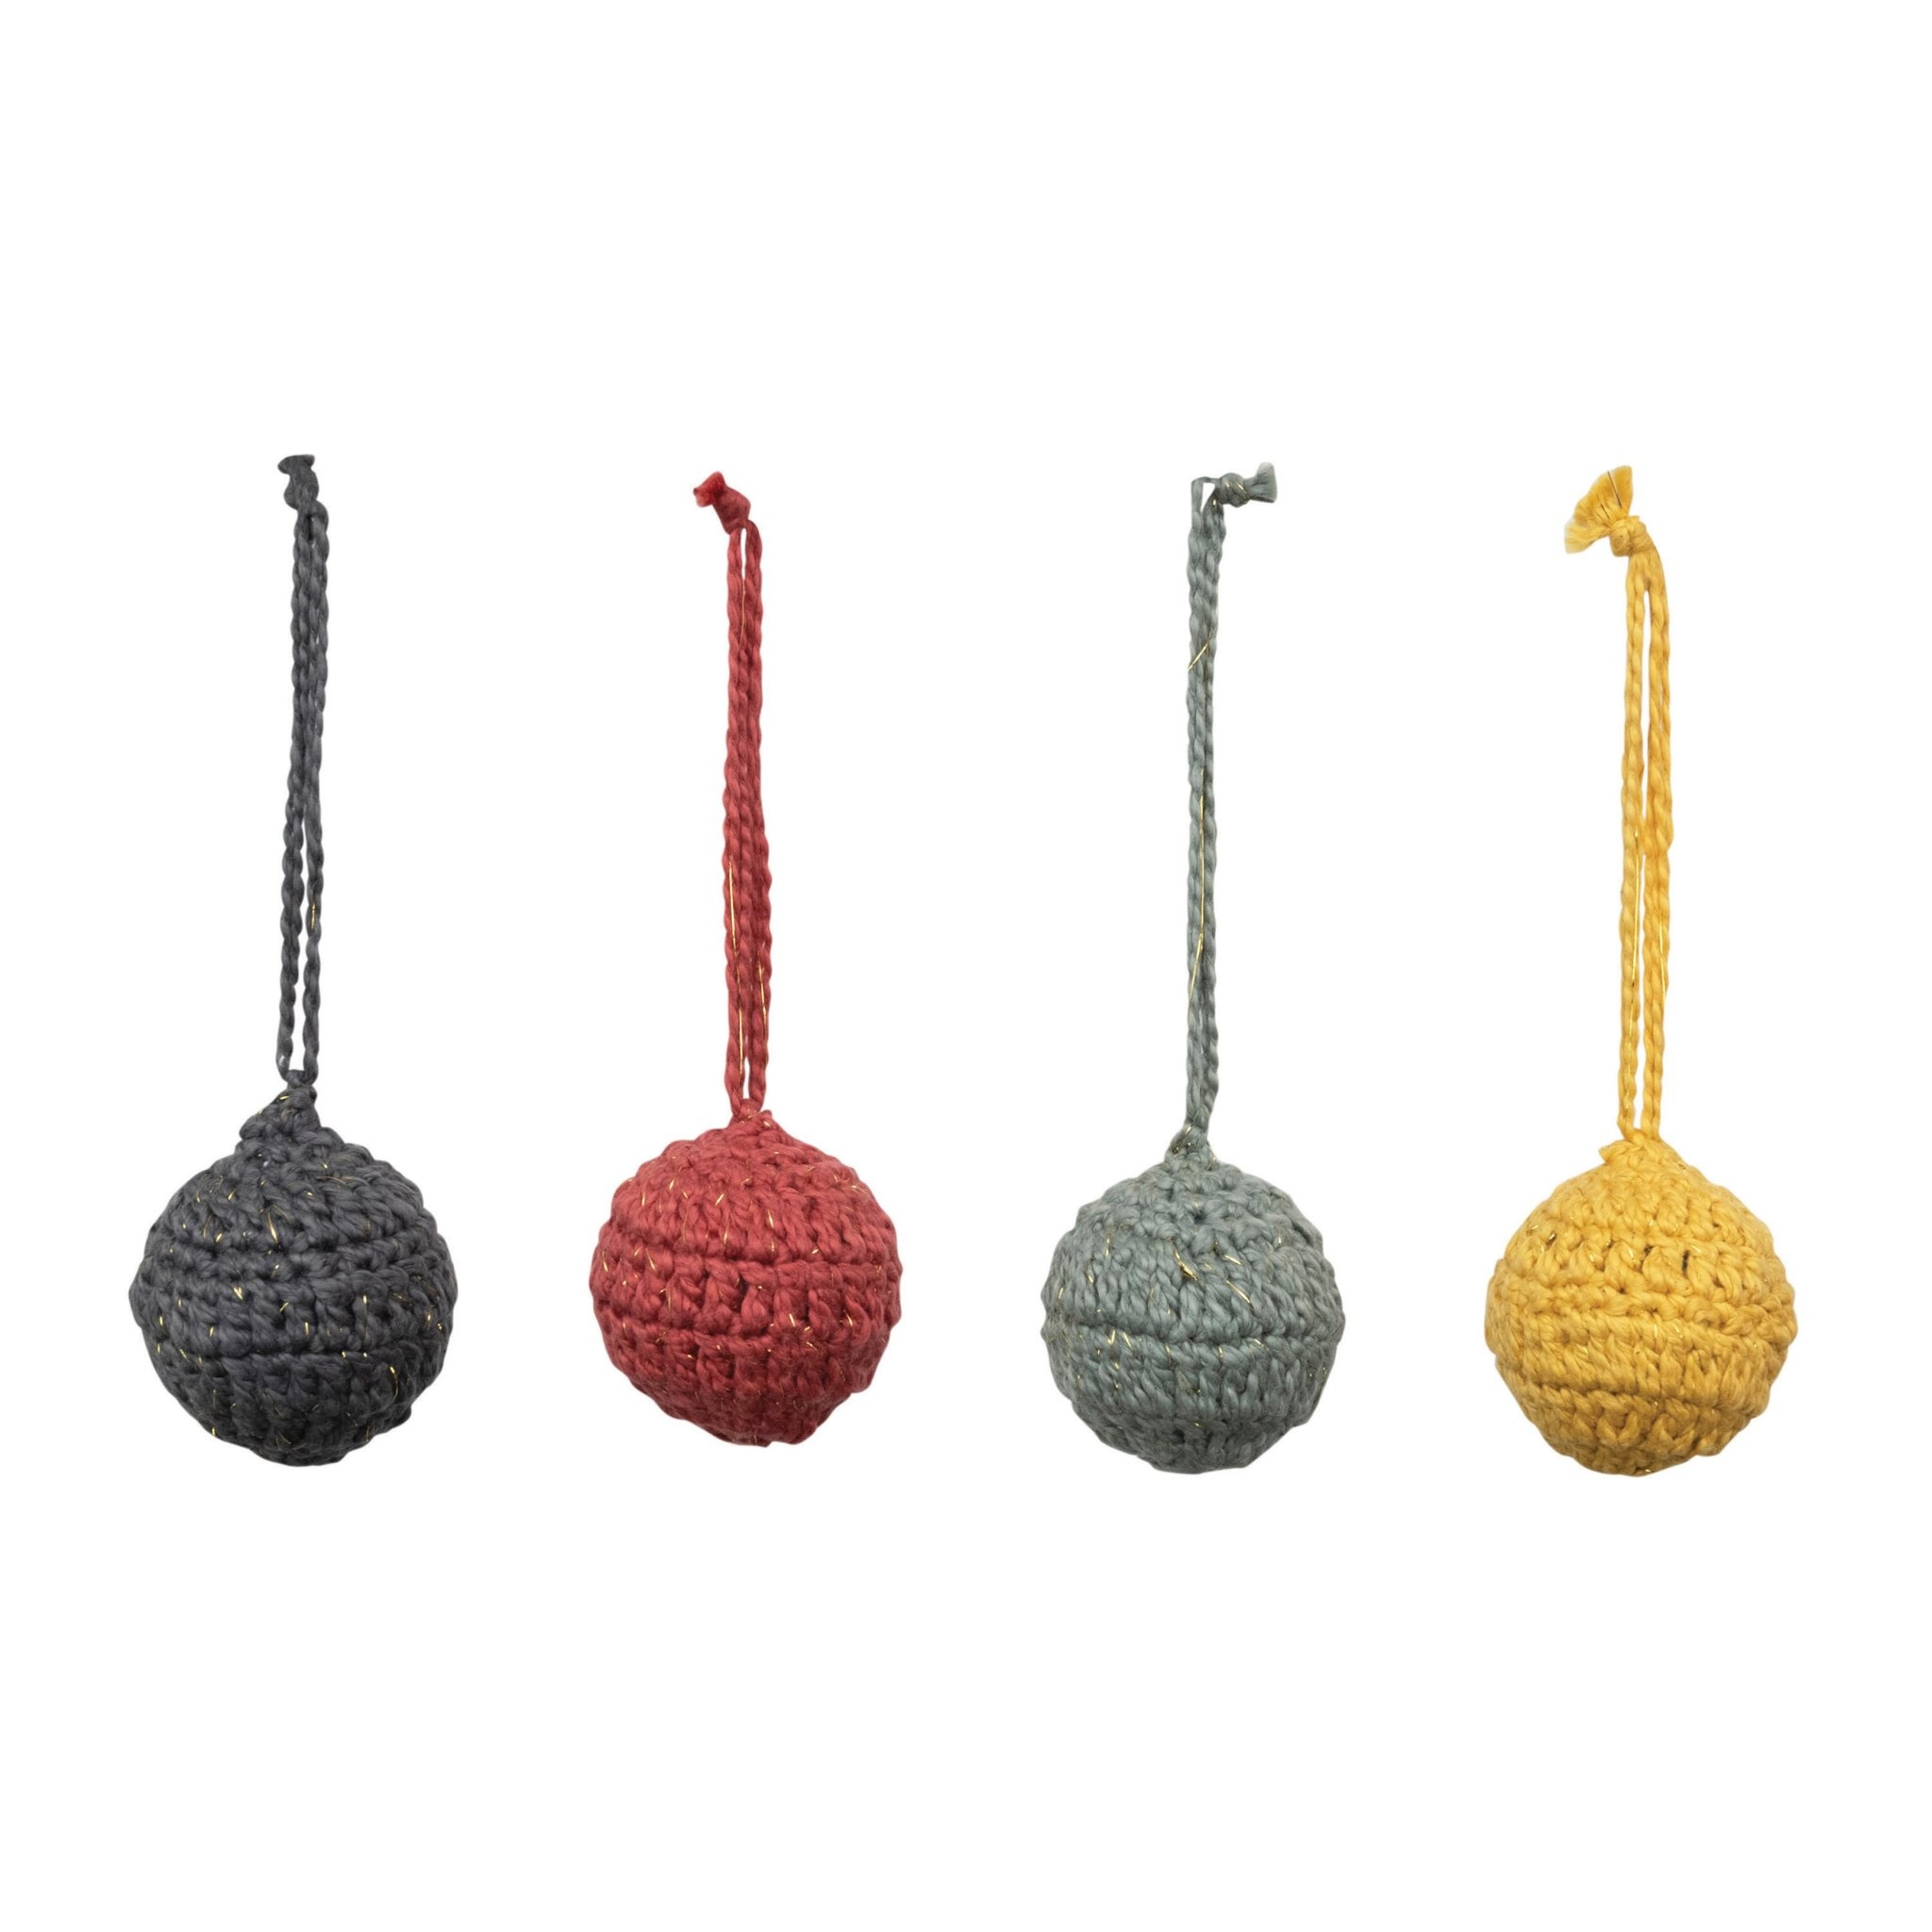 Cotton Crocheted Ball Ornament, priced separately